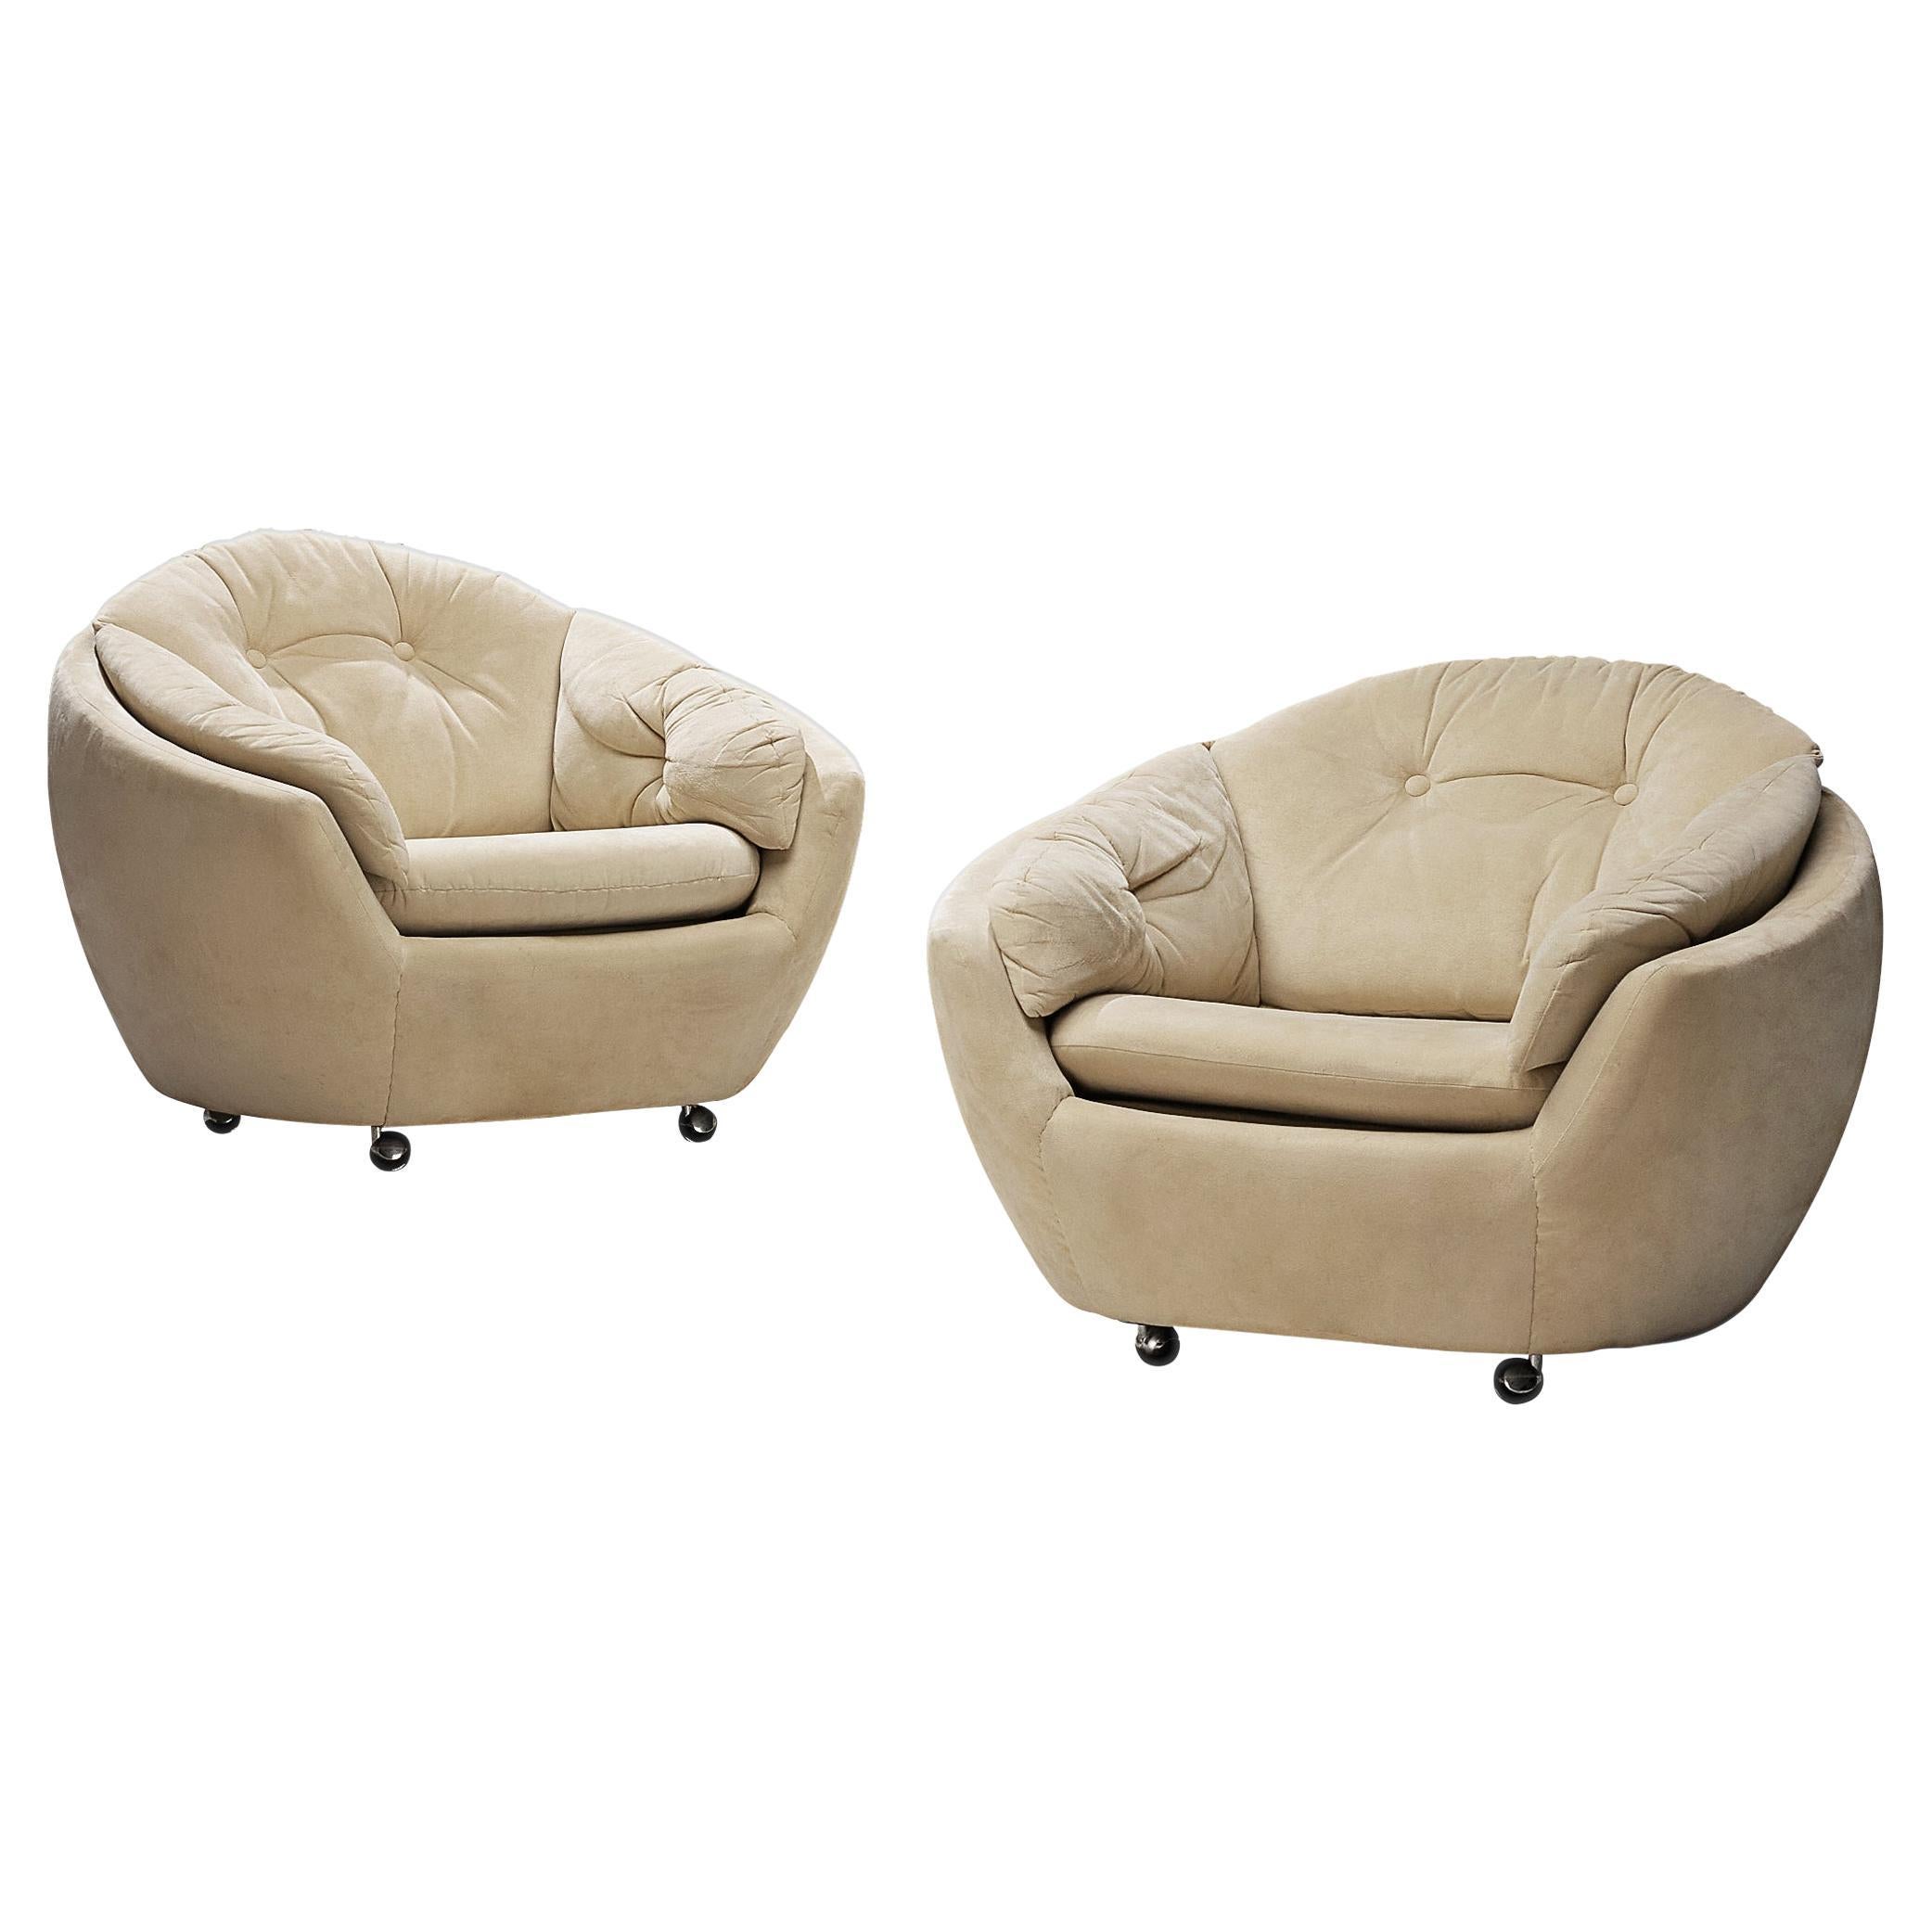 Knoll Antimott Pair of Lounge Chairs in Off-White Alcantara Upholstery